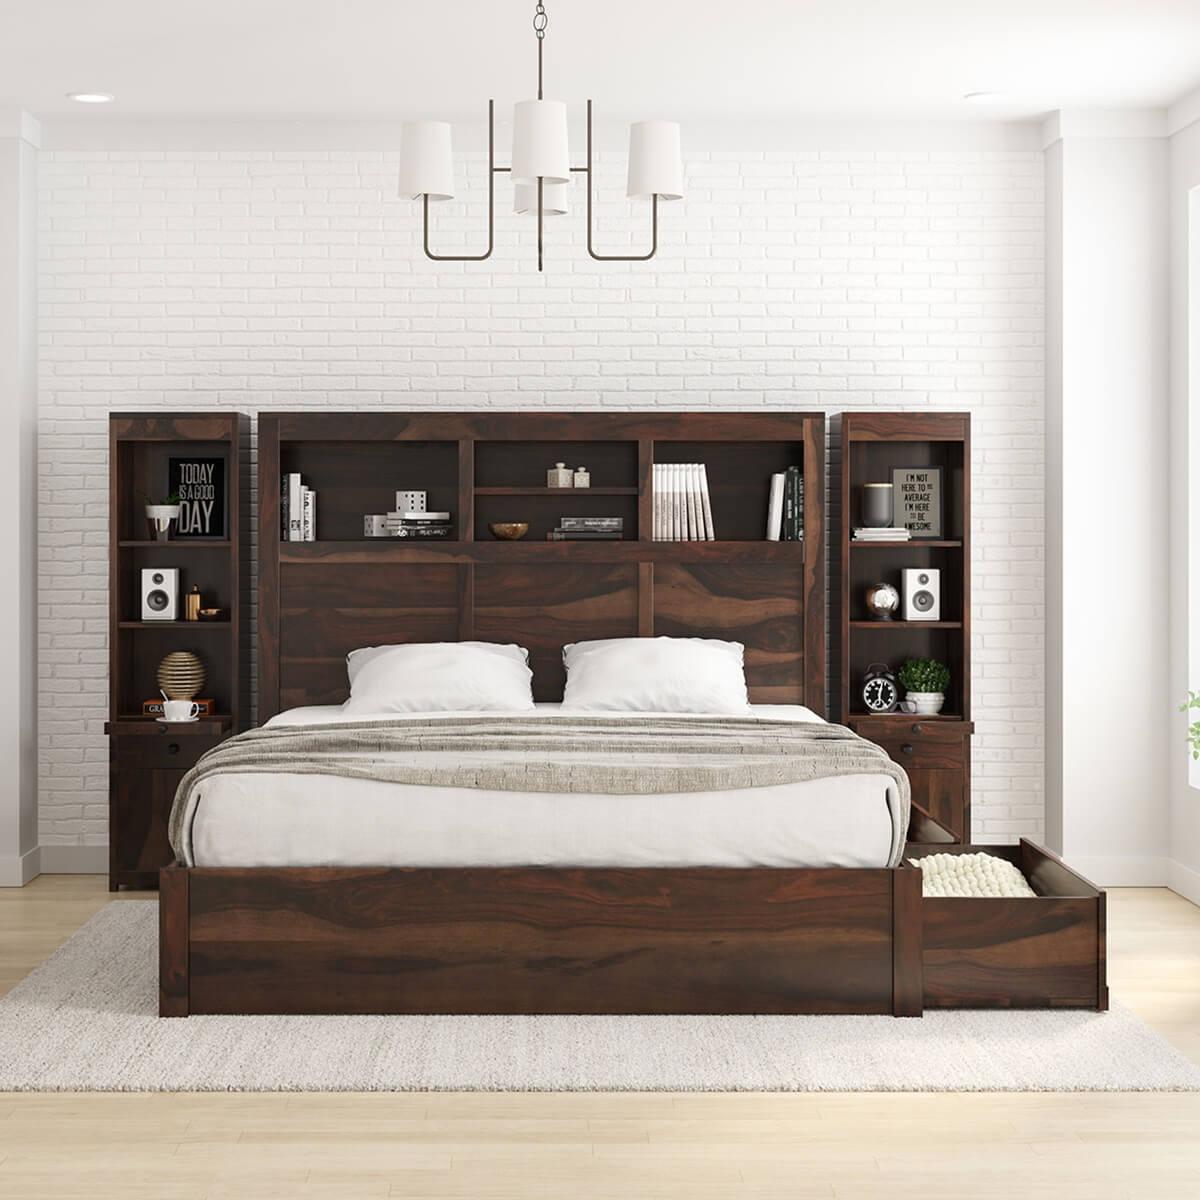 How To Attach A Headboard Any Bed, How To Attach Headboard Frame Without Holes